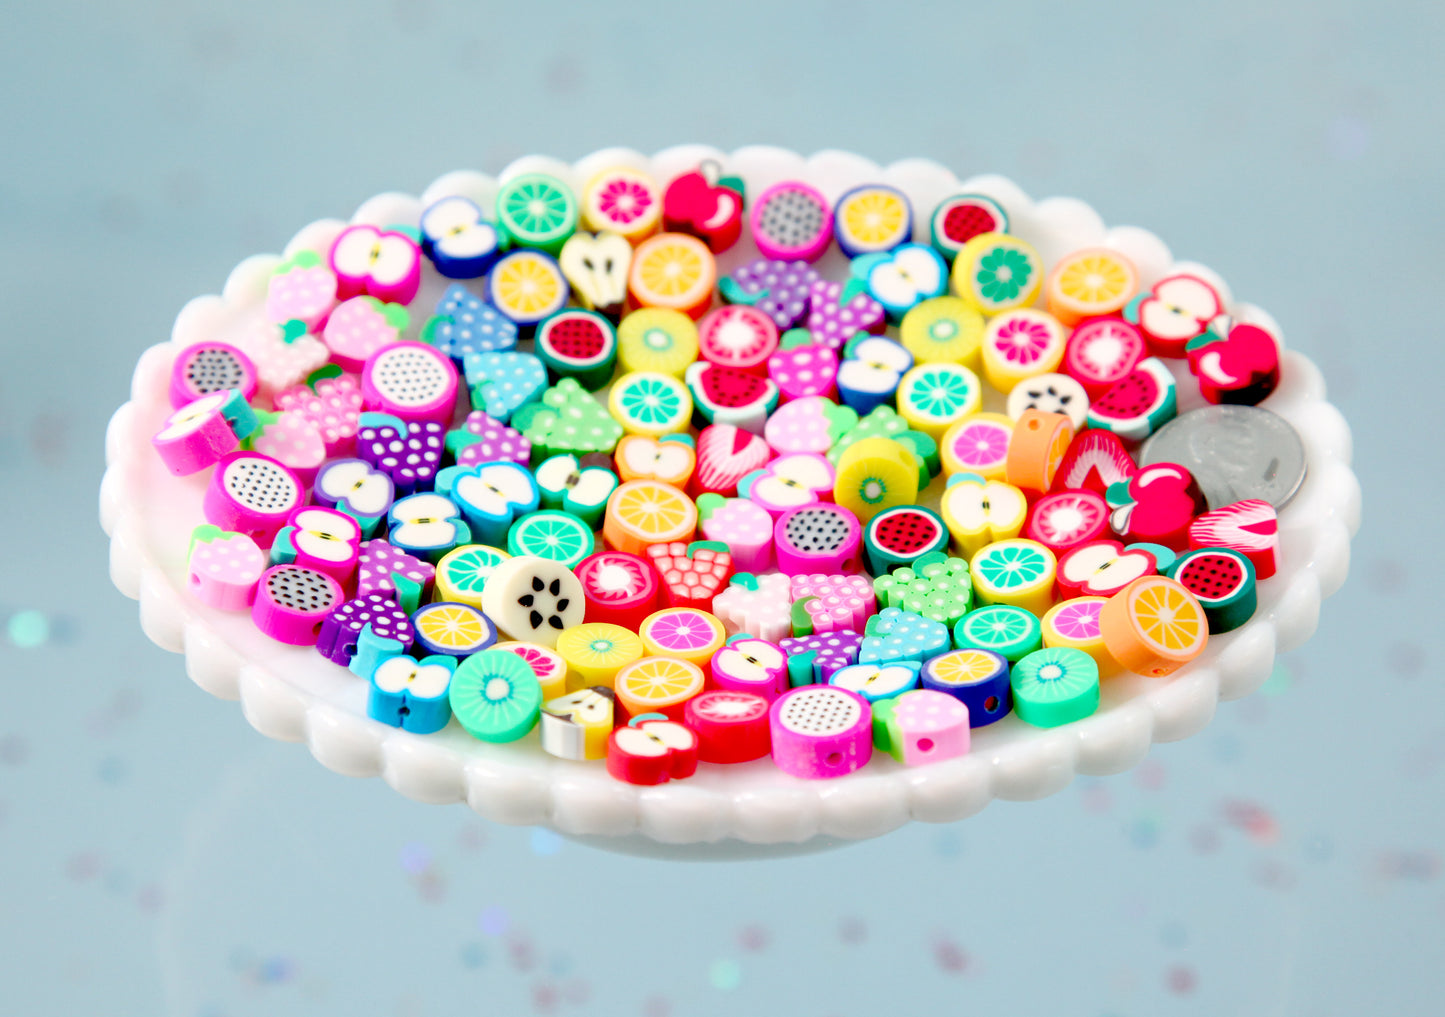 Fimo Fruit Beads - 10mm Mixed Fruit Fimo or Polymer Clay Beads - 50 pc set